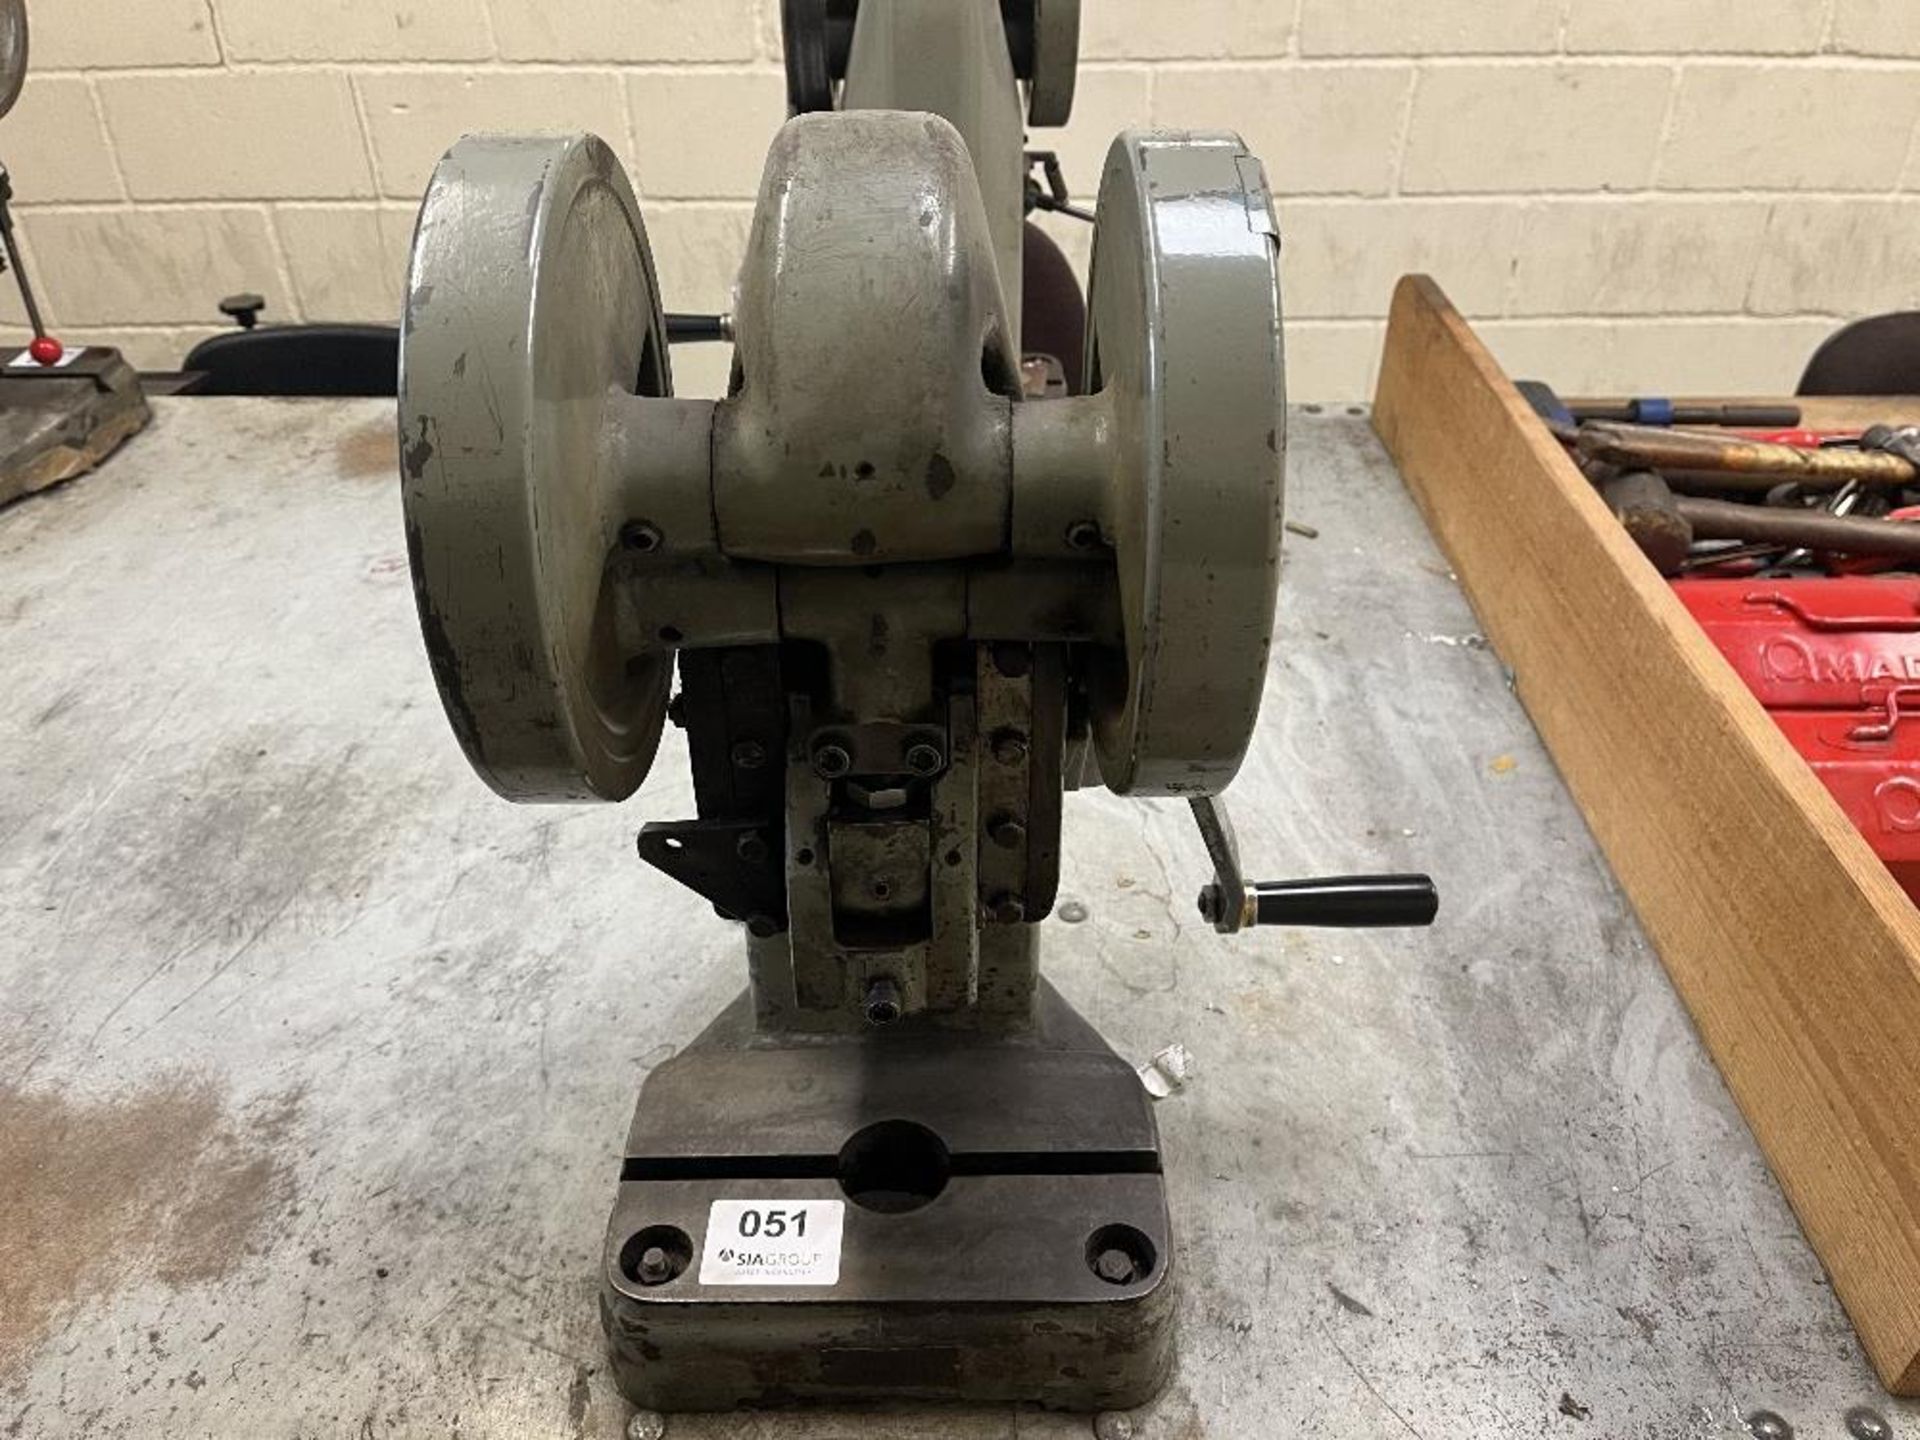 Bench top hand rotary toggle press